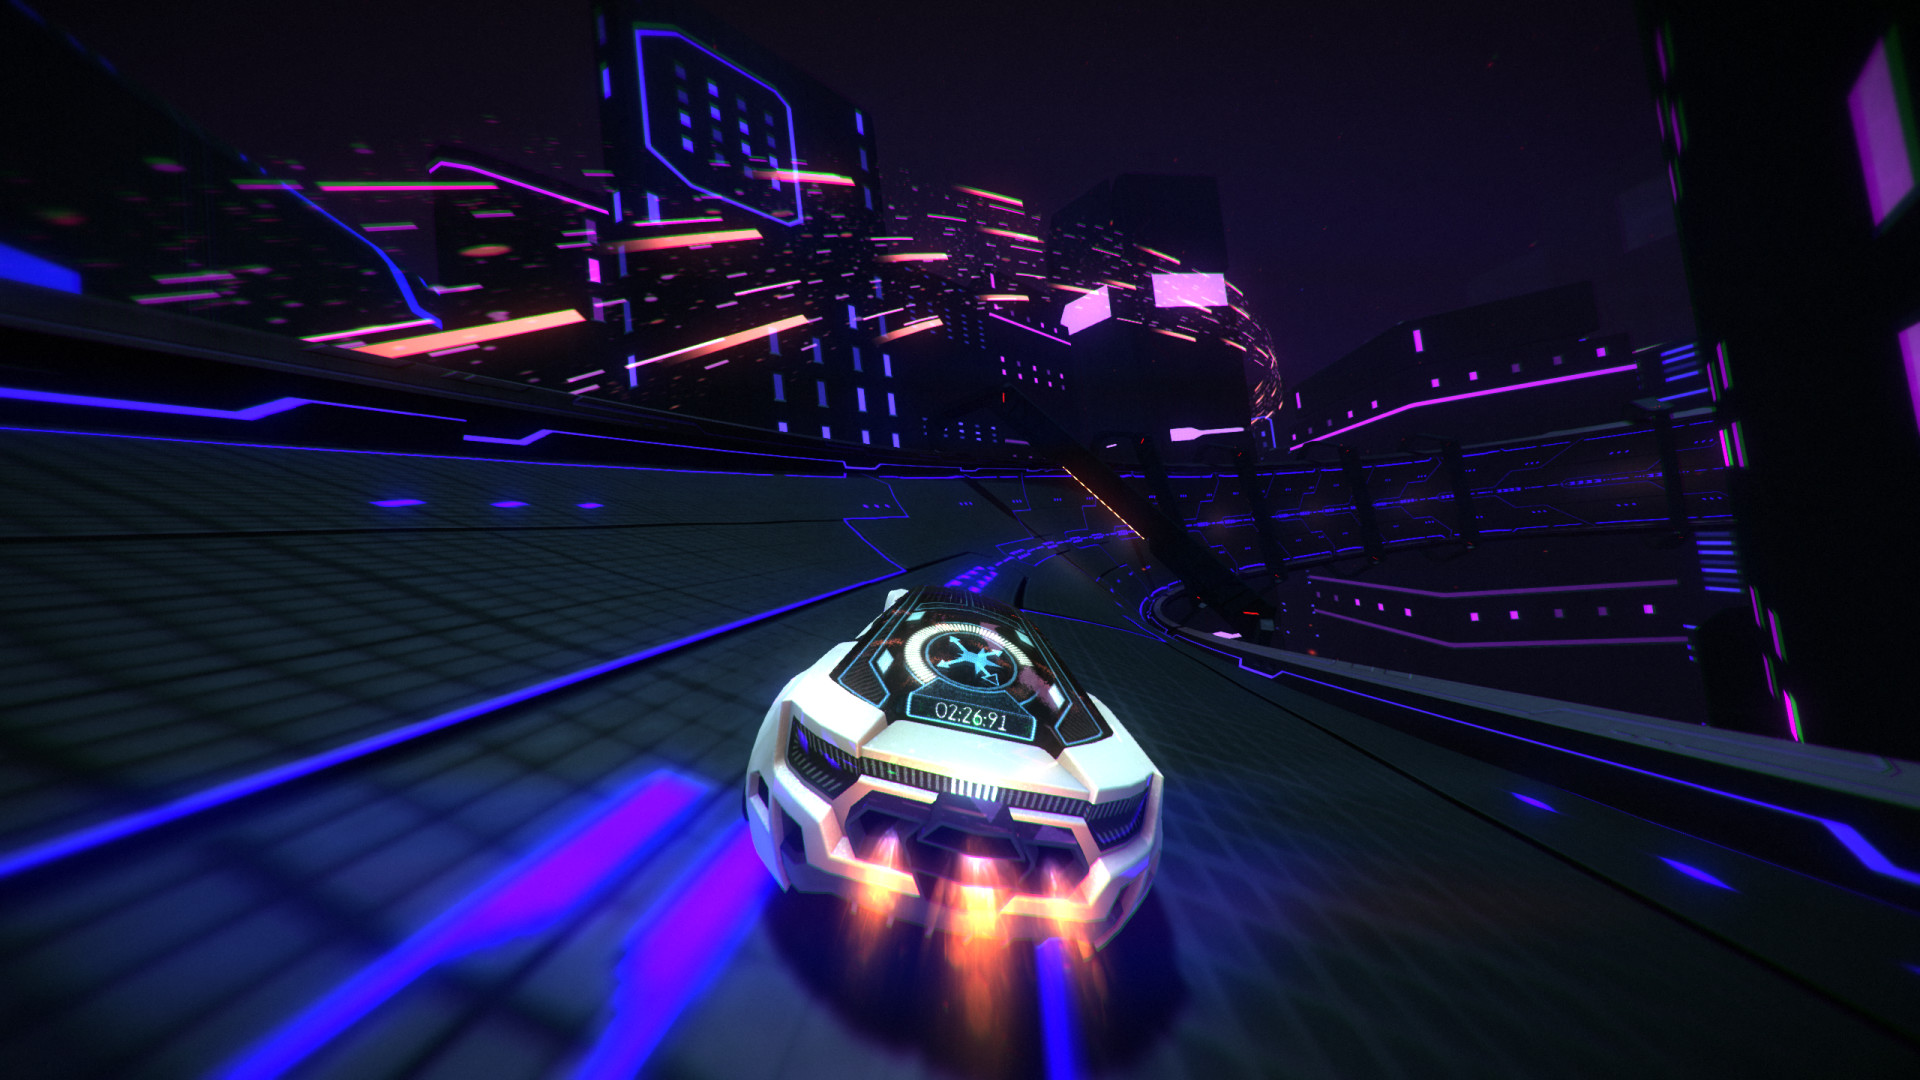 Futuristic and Neon-Drenched Racing Game “Distance” Hits Full Release